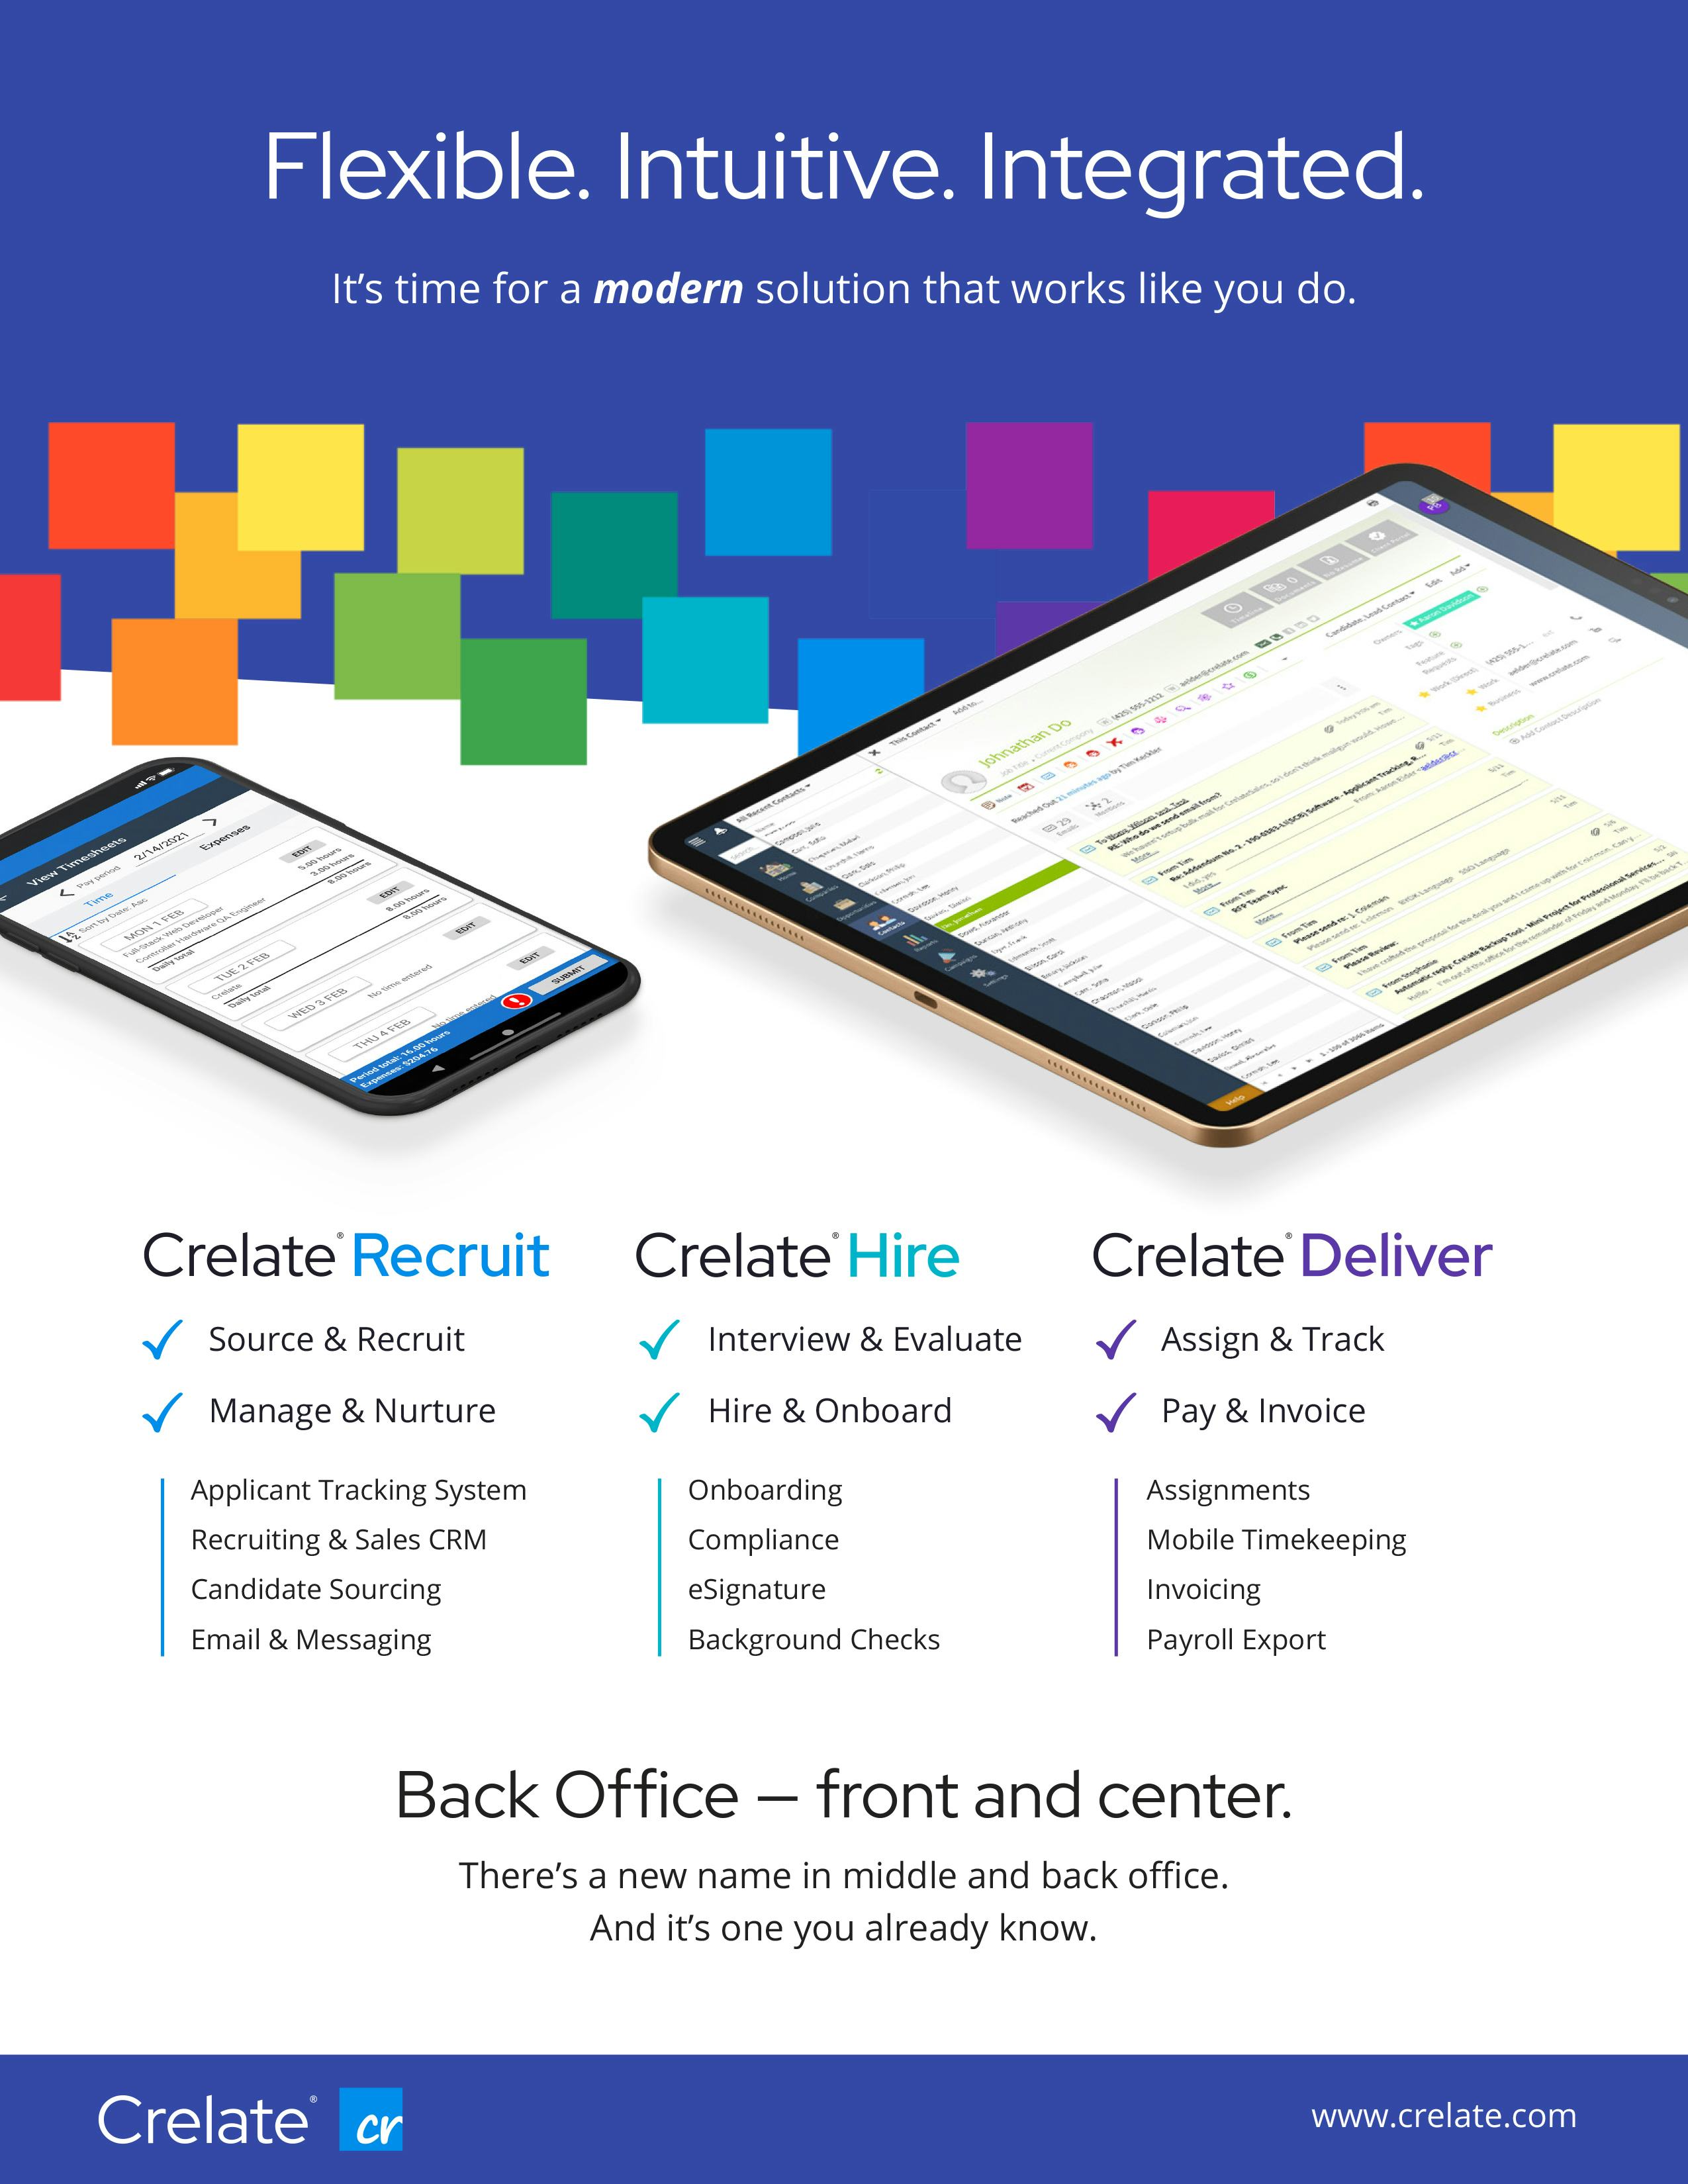 Crelate Software - Back Office